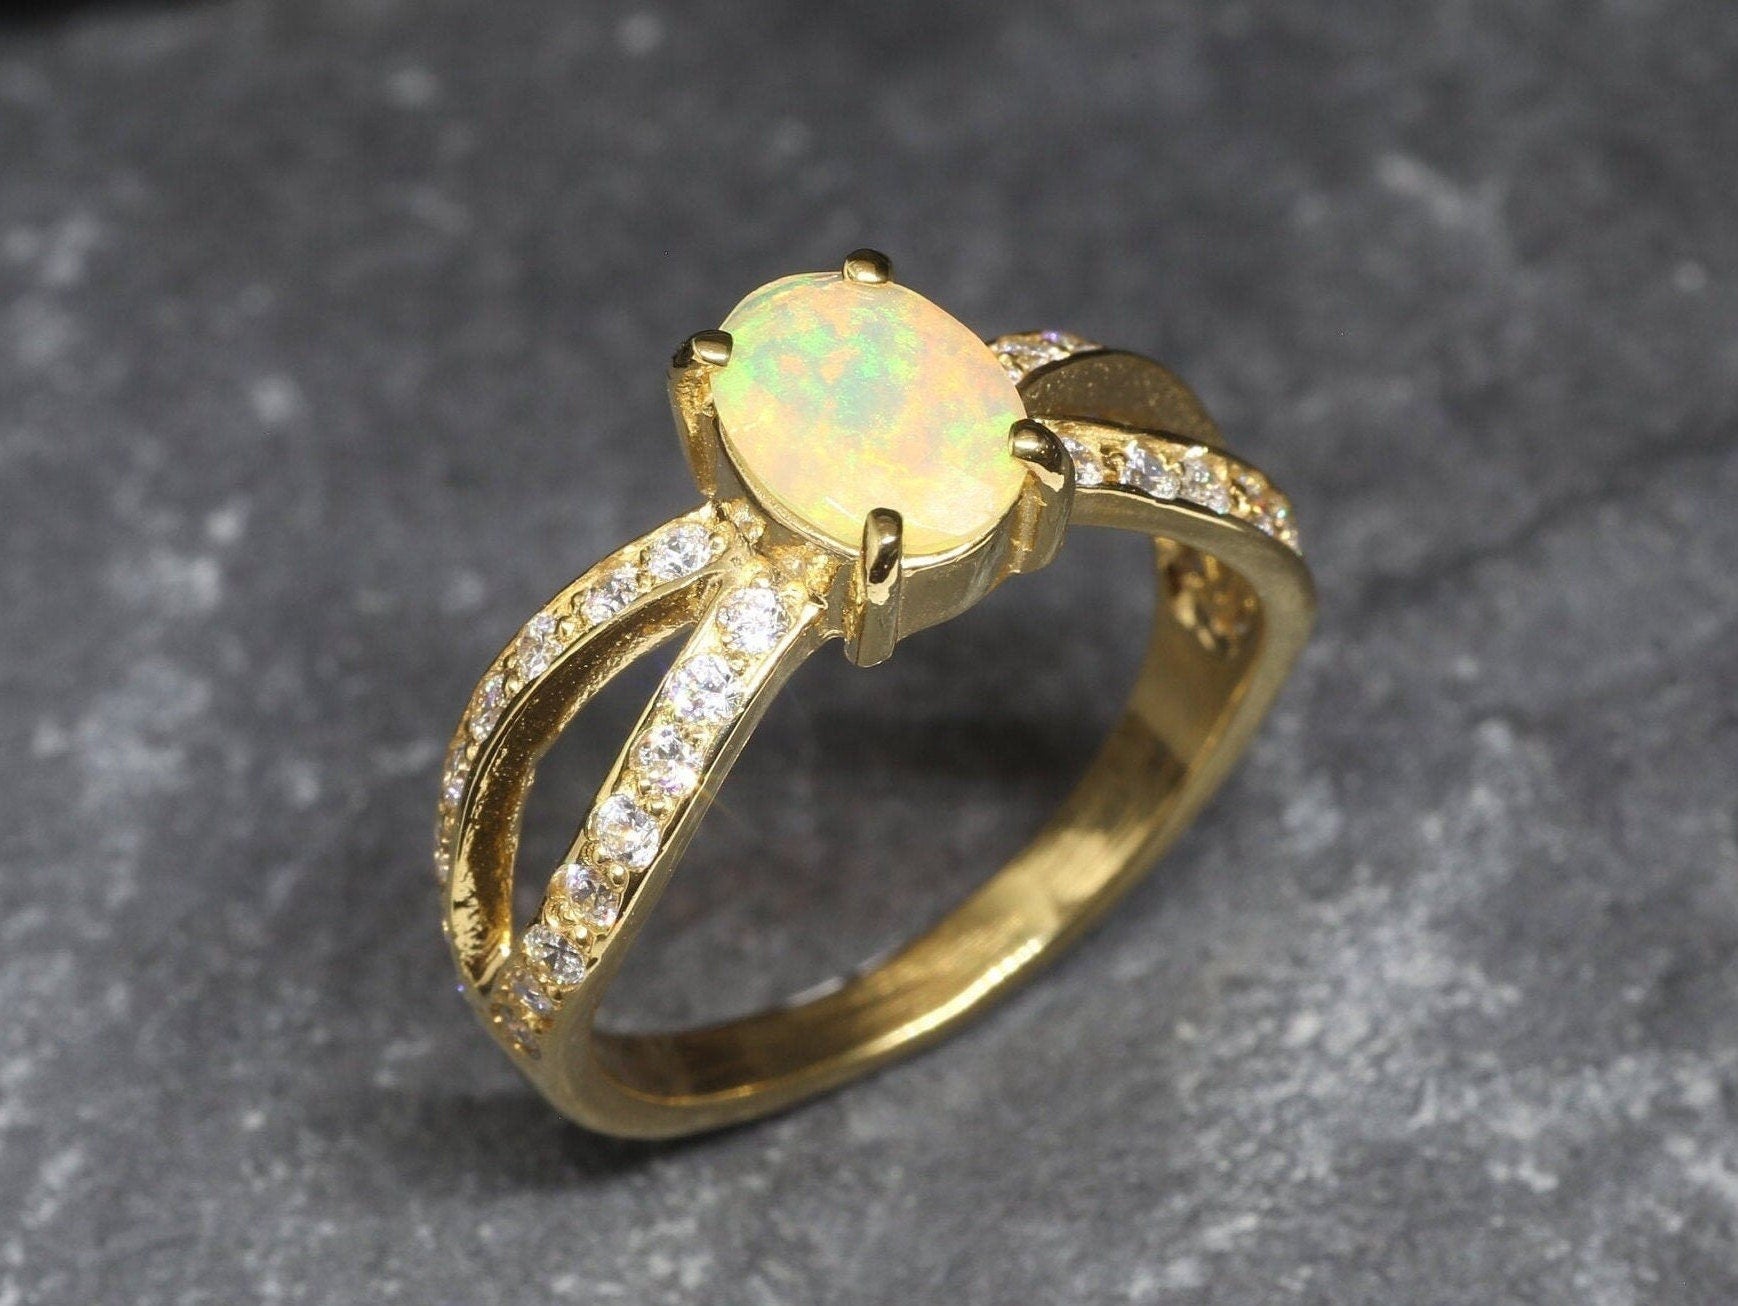 Gold Opal Ring, Fire Opal Ring, Natural Opal, Engagement Ring, Ethiopian Opal, Gold Plated Ring, Antique Ring, October Birthstone, Fire Opal